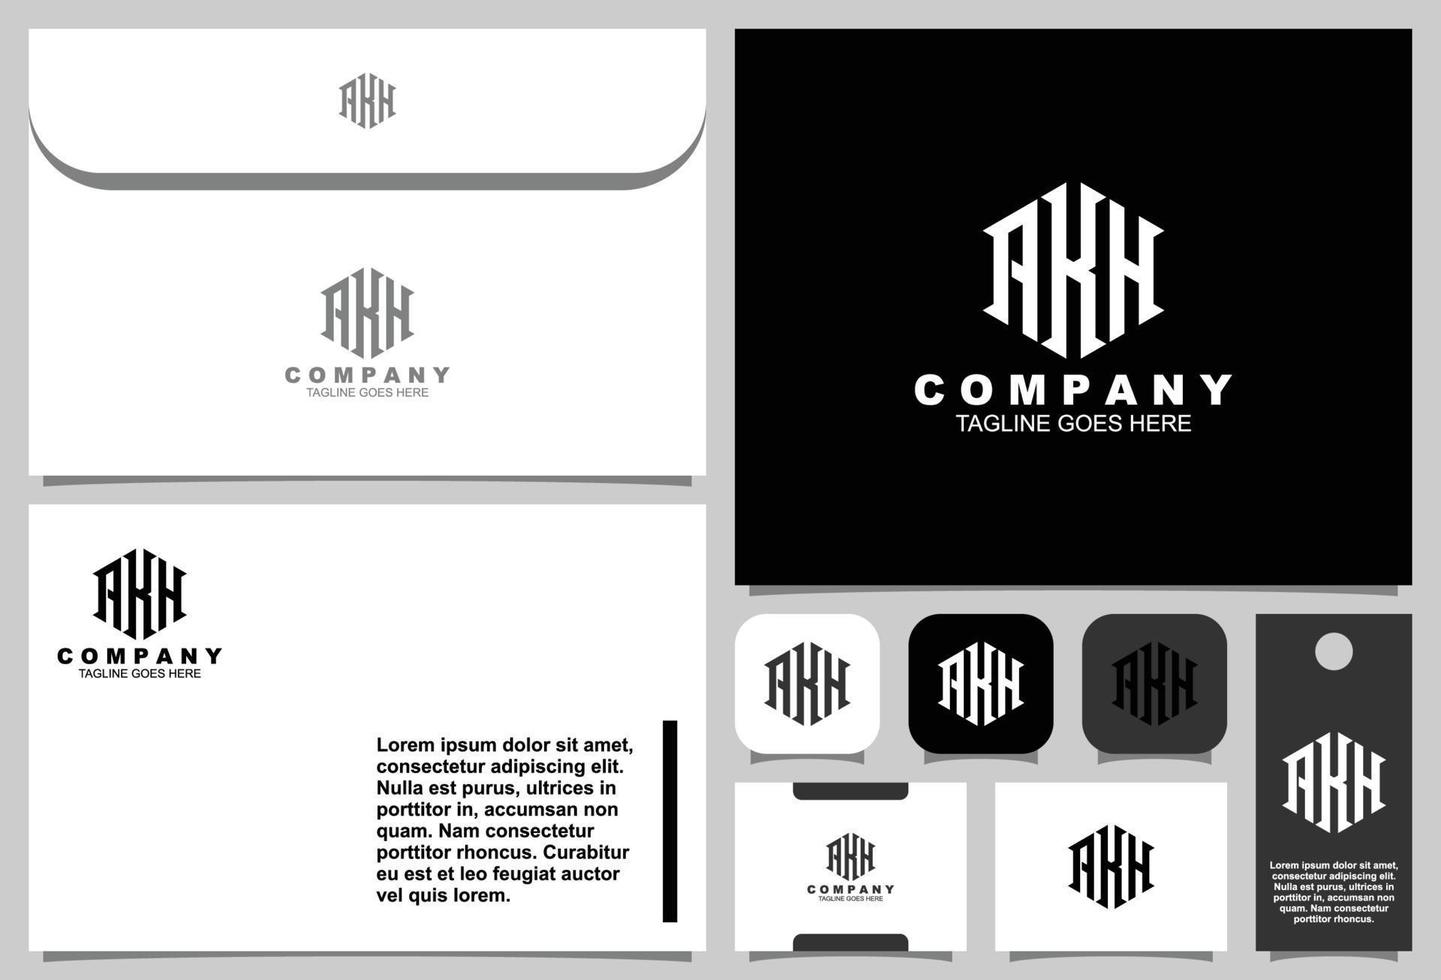 Letter A K H monogram logo design with business card and envelope template vector